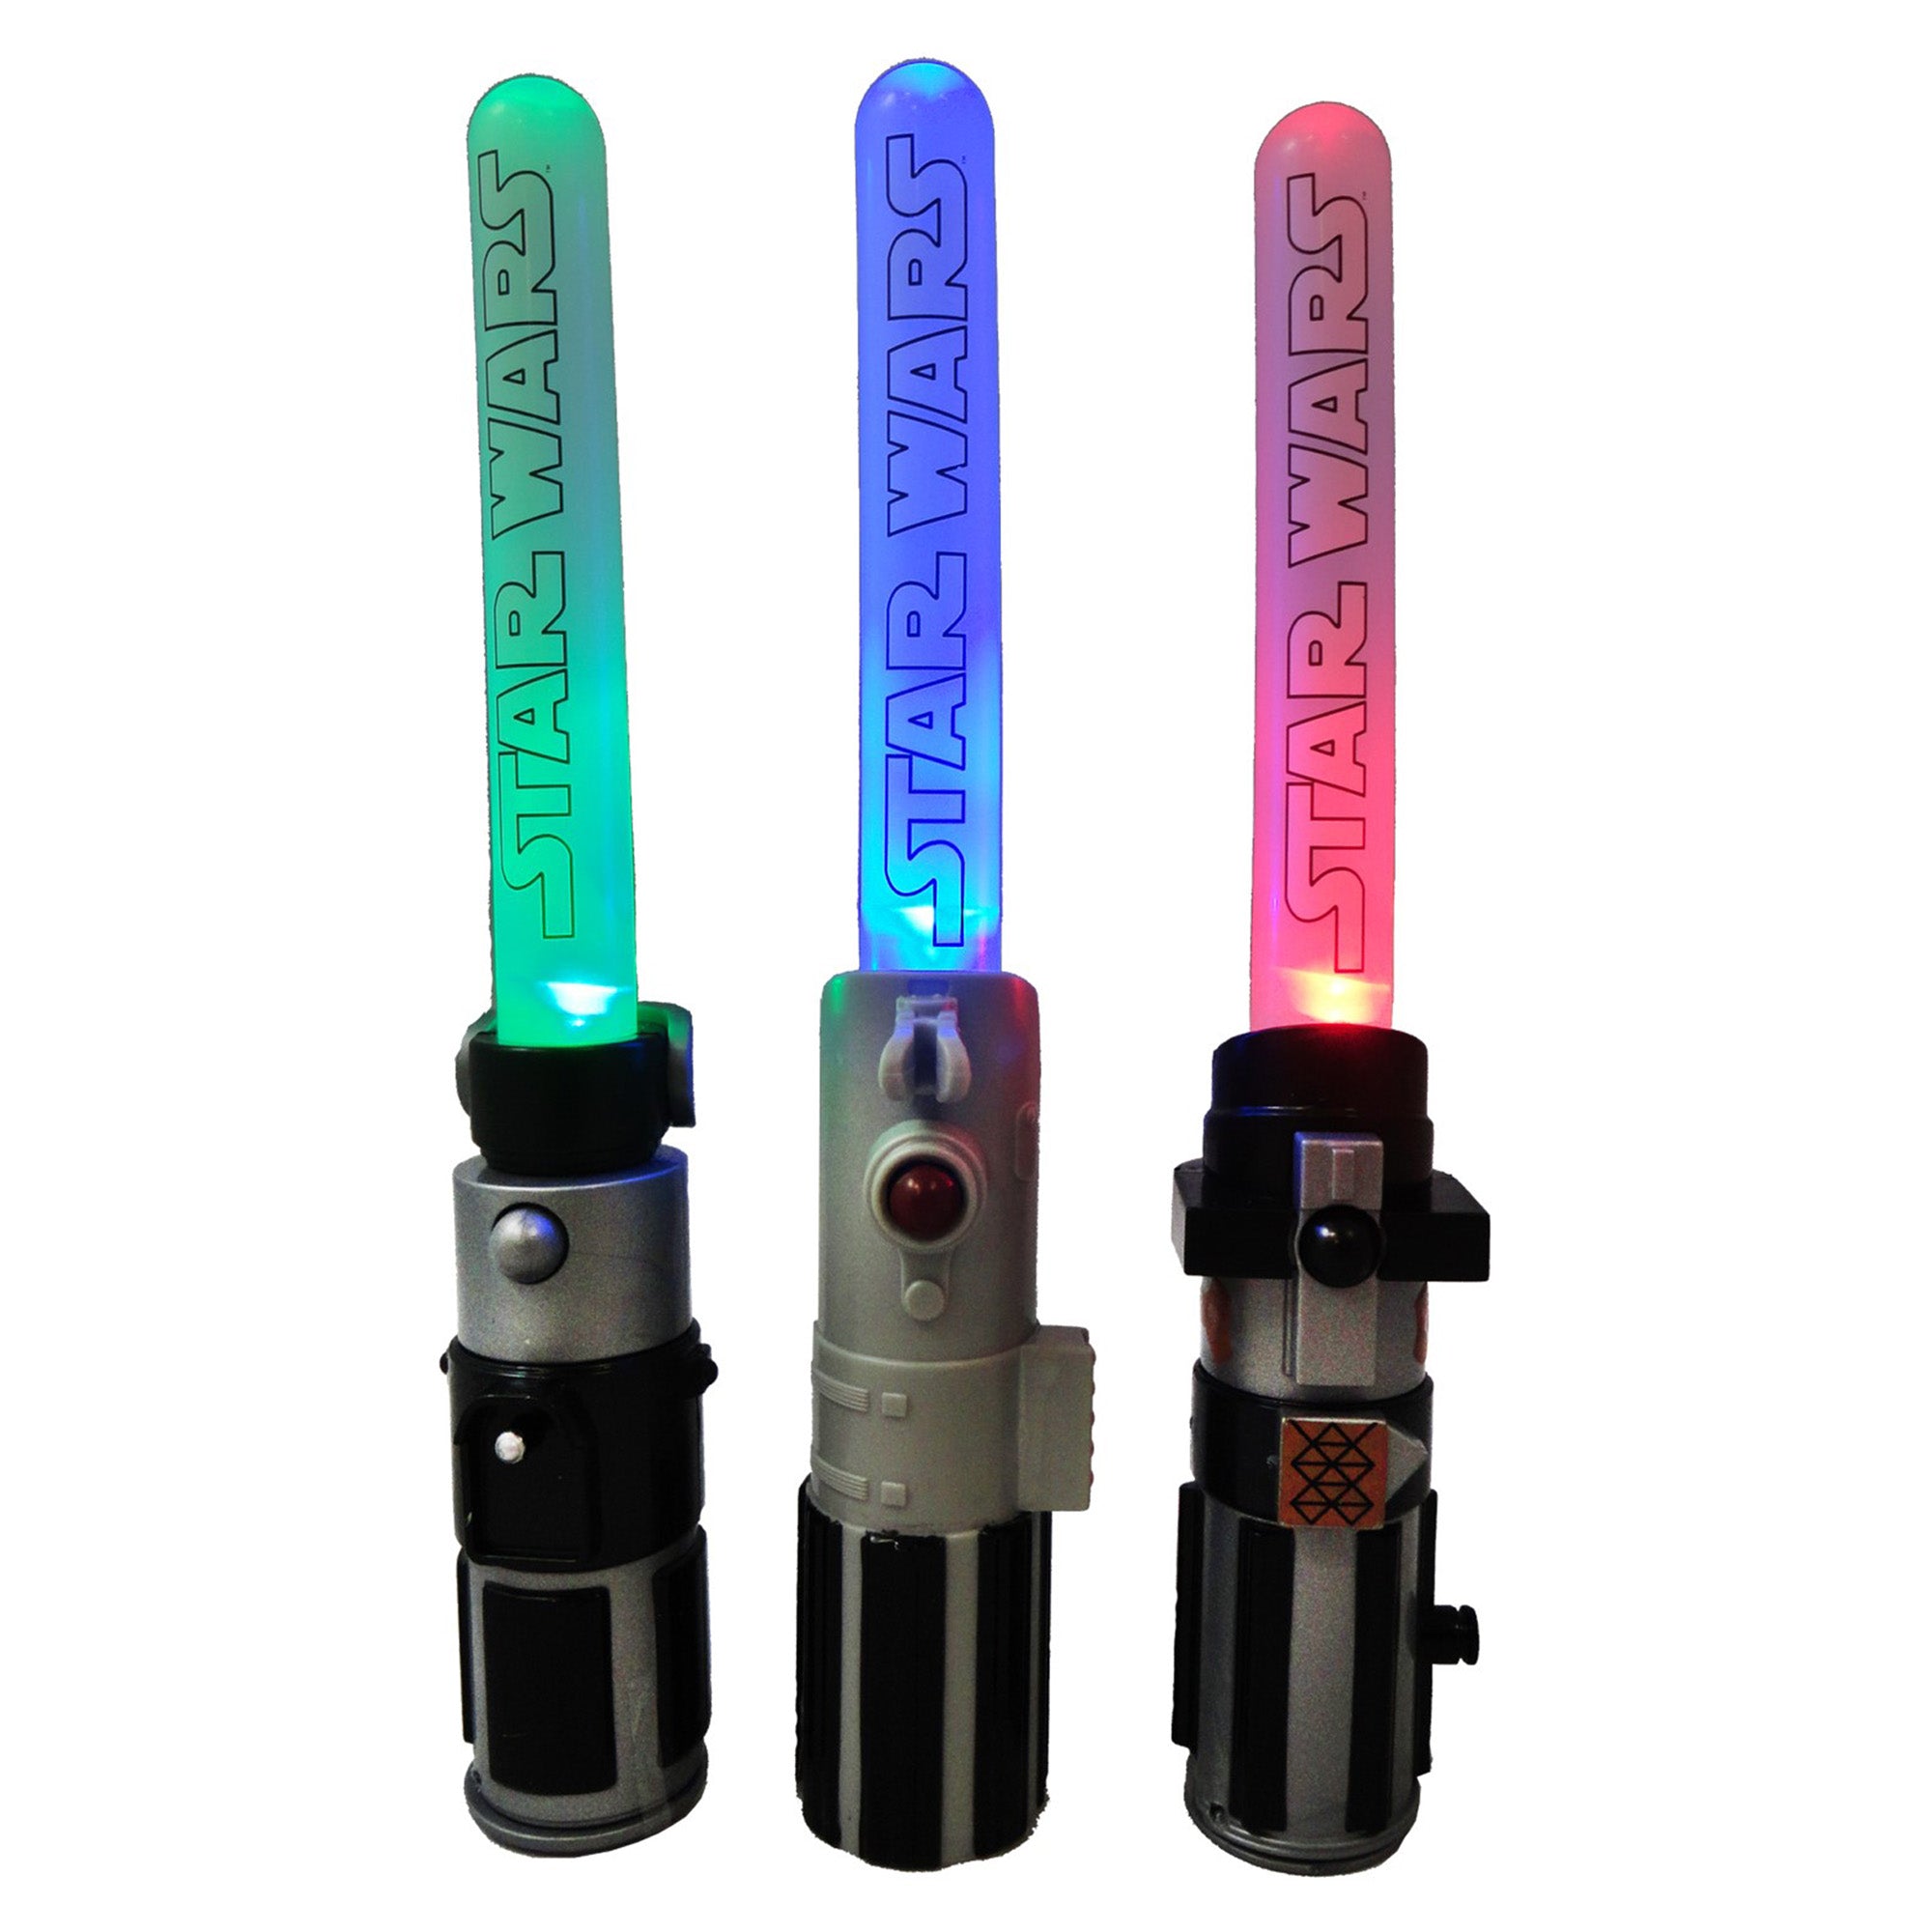 Star Wars Light Saber with Candy, Assortment, 1 Count